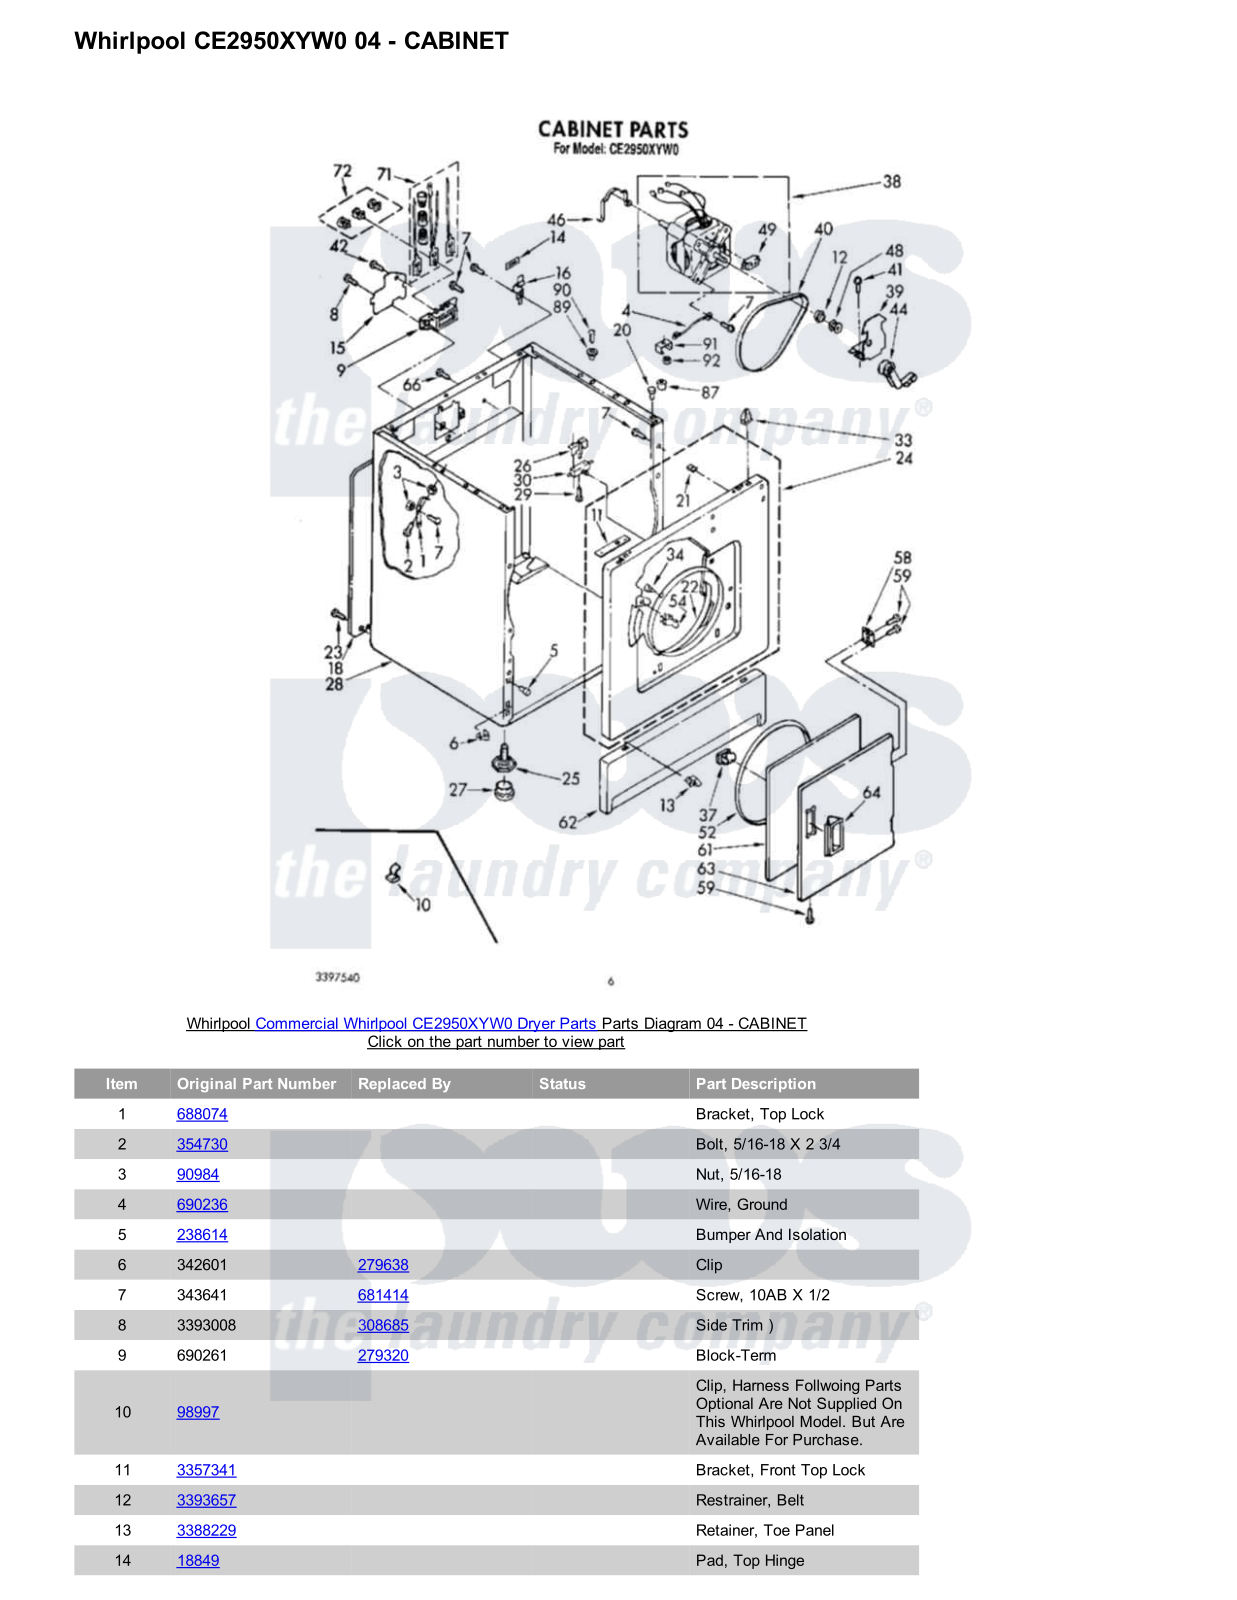 Whirlpool CE2950XYW0 Parts Diagram